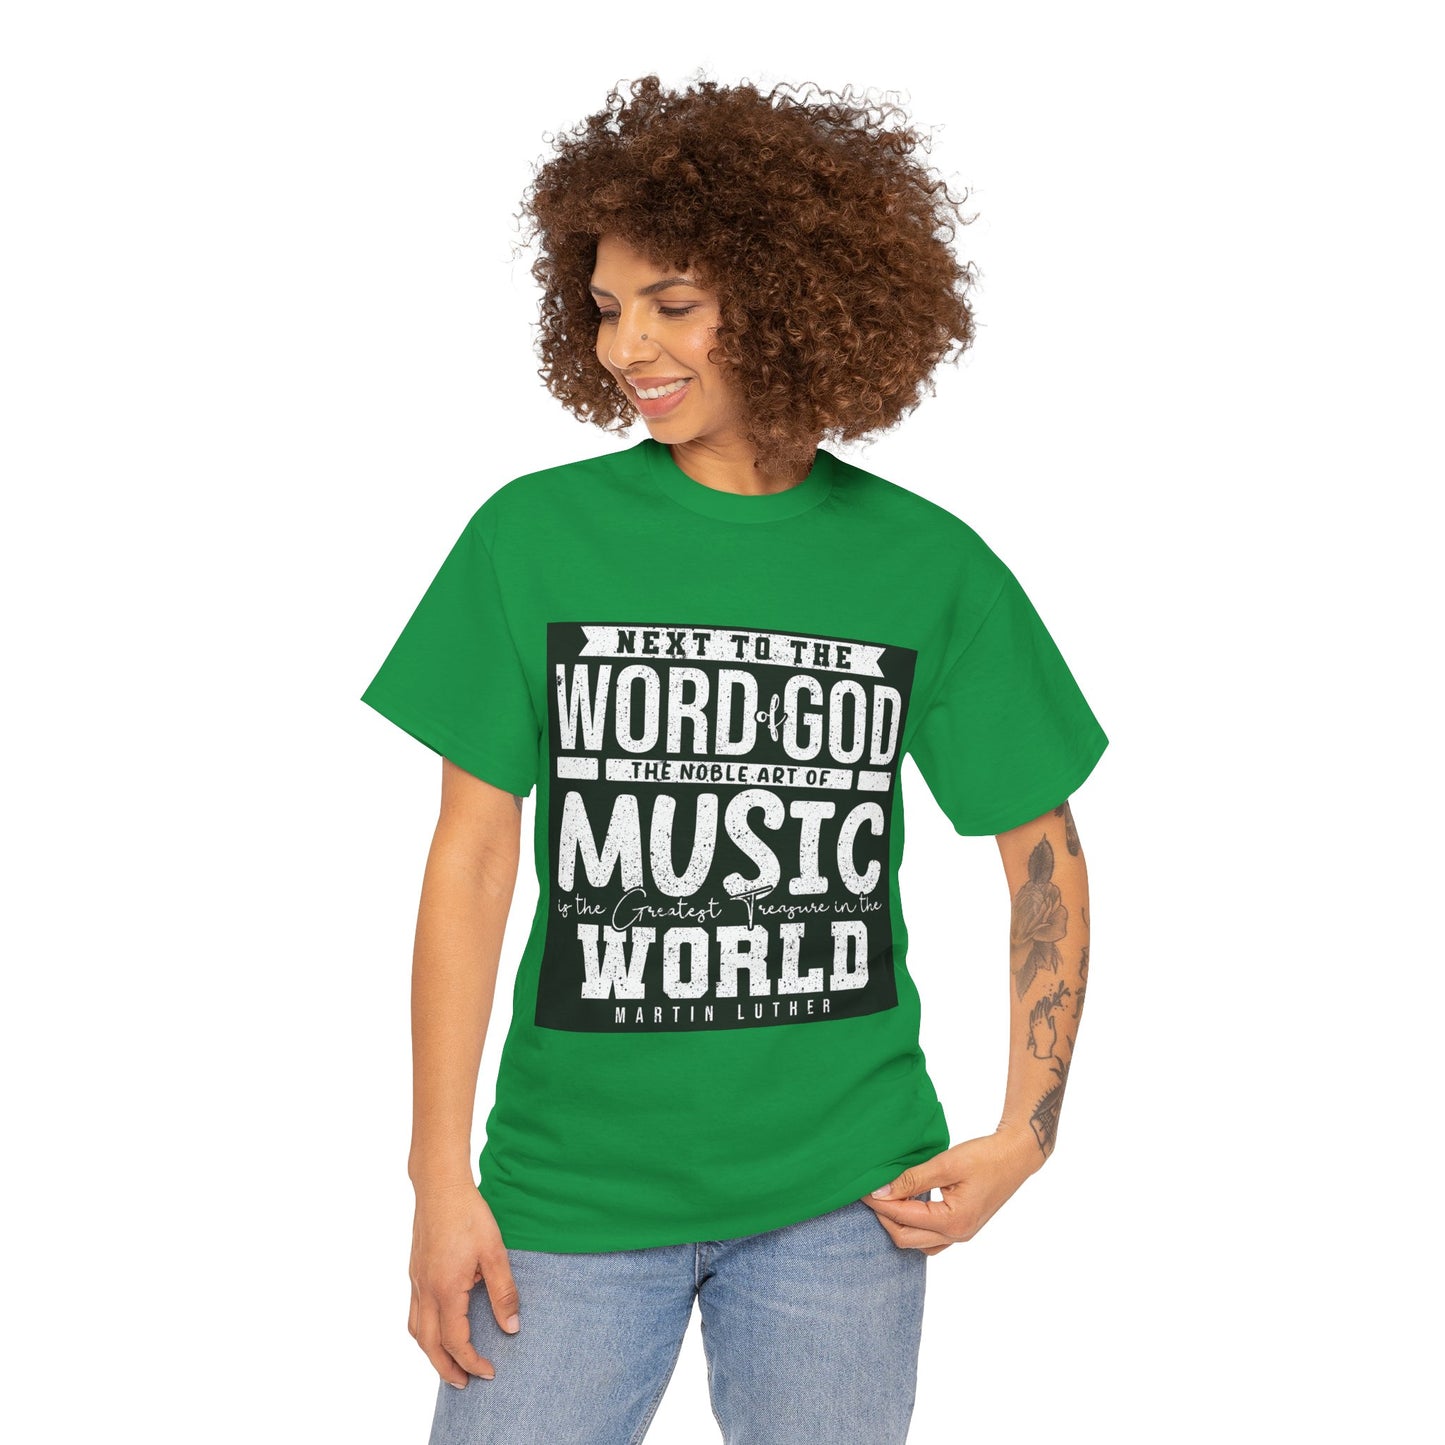 The Language Keeper T-Shirt: Next to the word of god the noble art of music